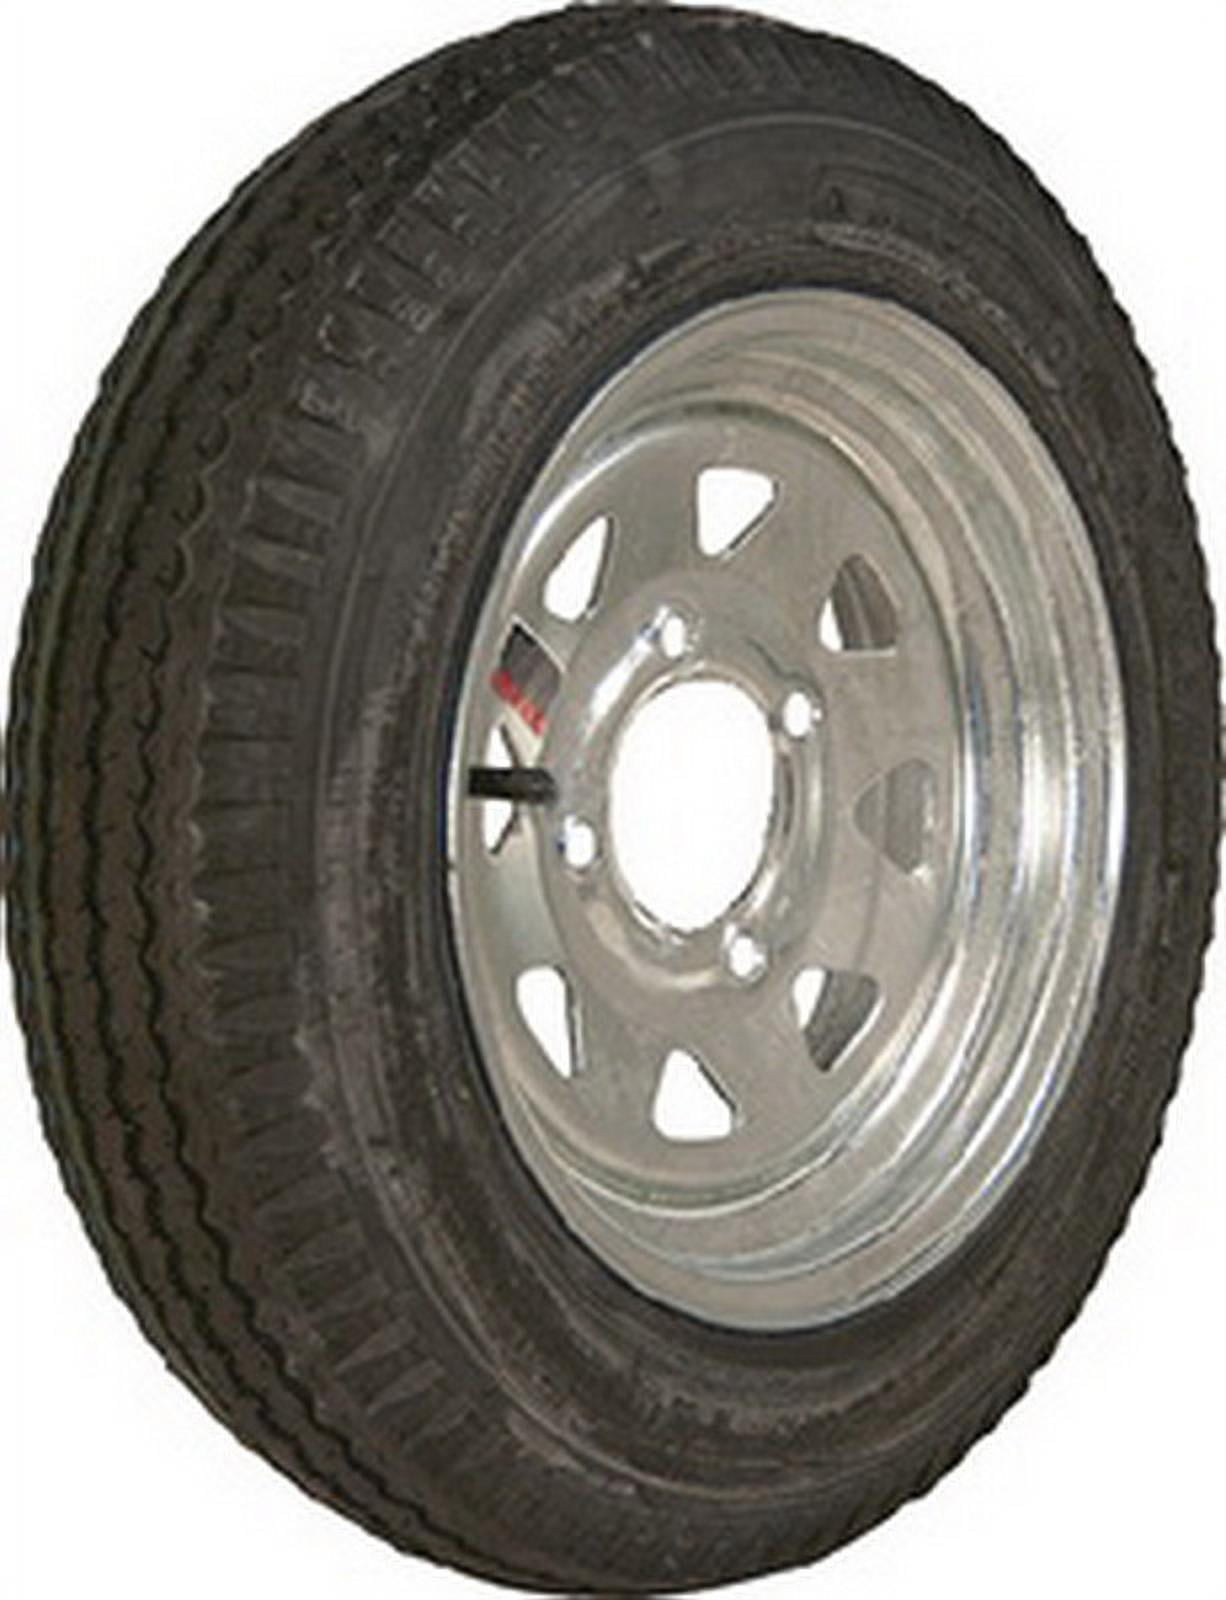 LoadStar 4-hole 12 x4 Solid White Trailer Wheel and Tire 4.80-12 4ply 